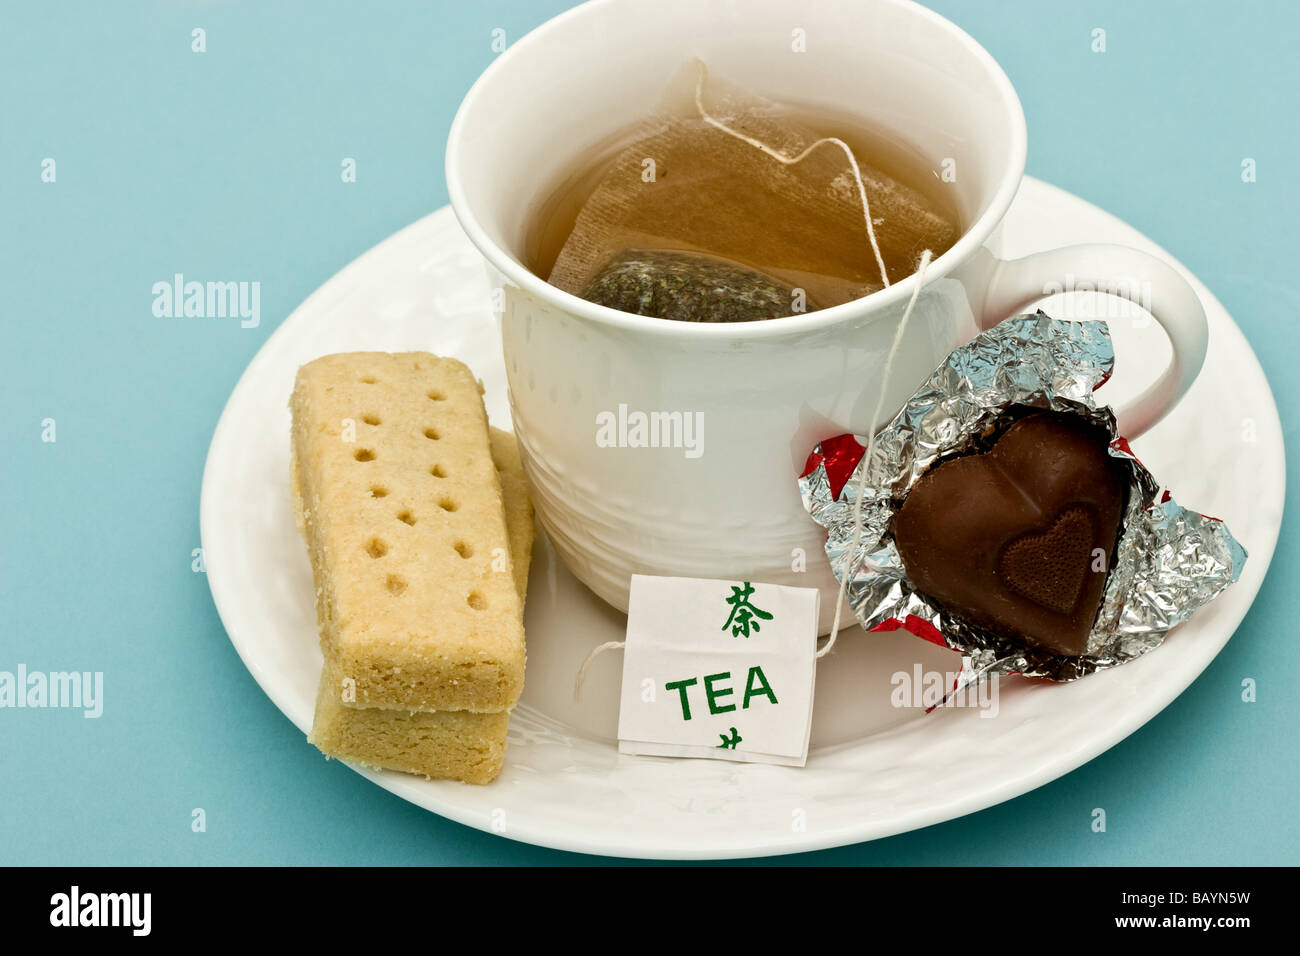 Cup of tea with shortbread biscuit and chocolate candy Stock Photo